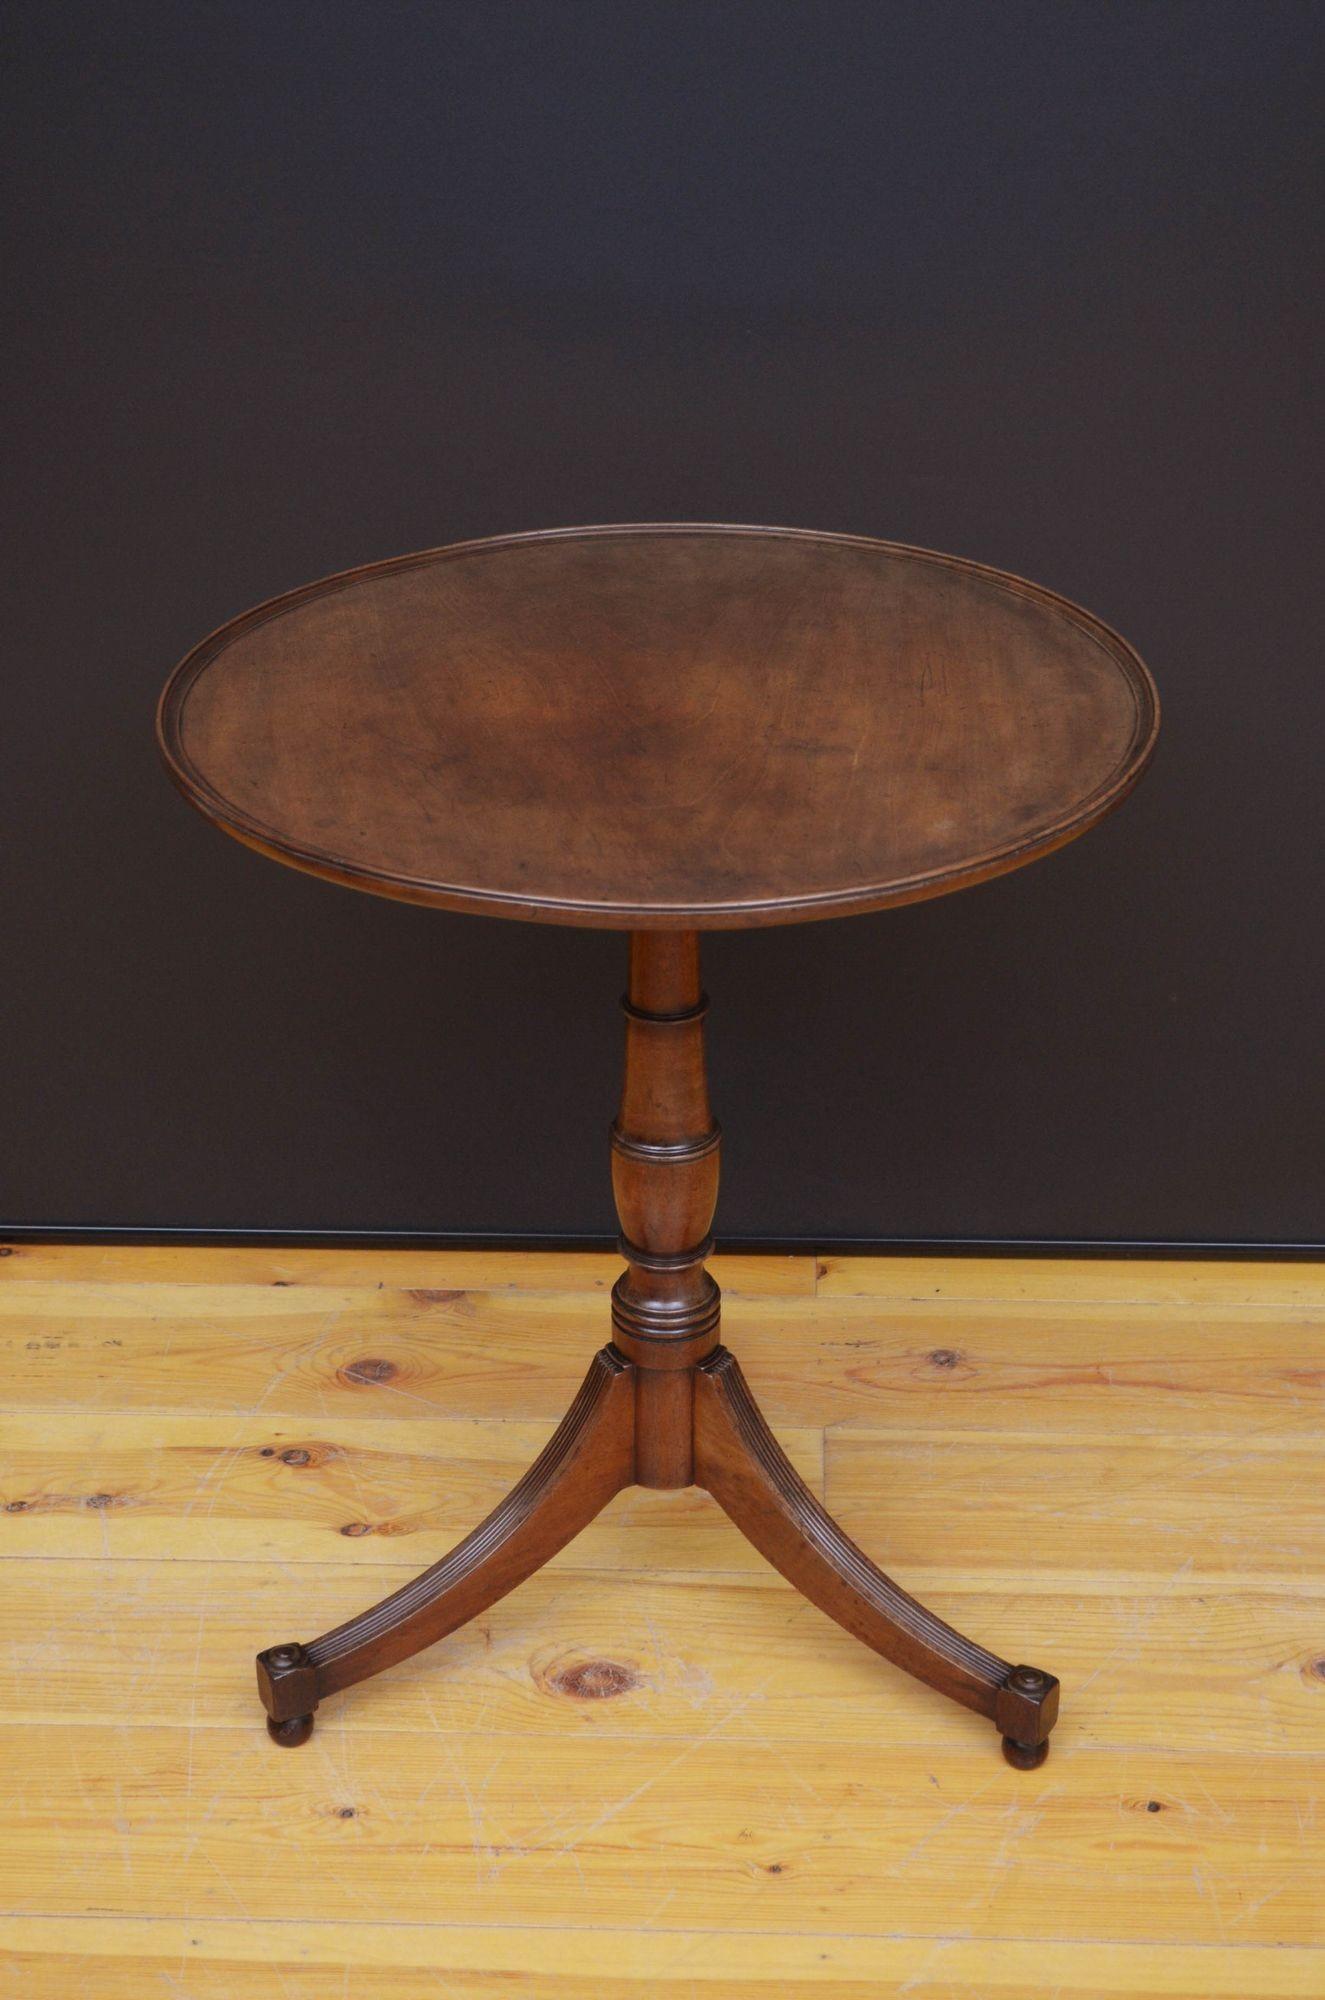 Sn5405 Fine quality Georgian mahogany side table, having figured mahogany, dished top raise on vase shaped and ringed column terminating in three downswept reeded legs with decorative roundels and bun feet. This antique table is in original